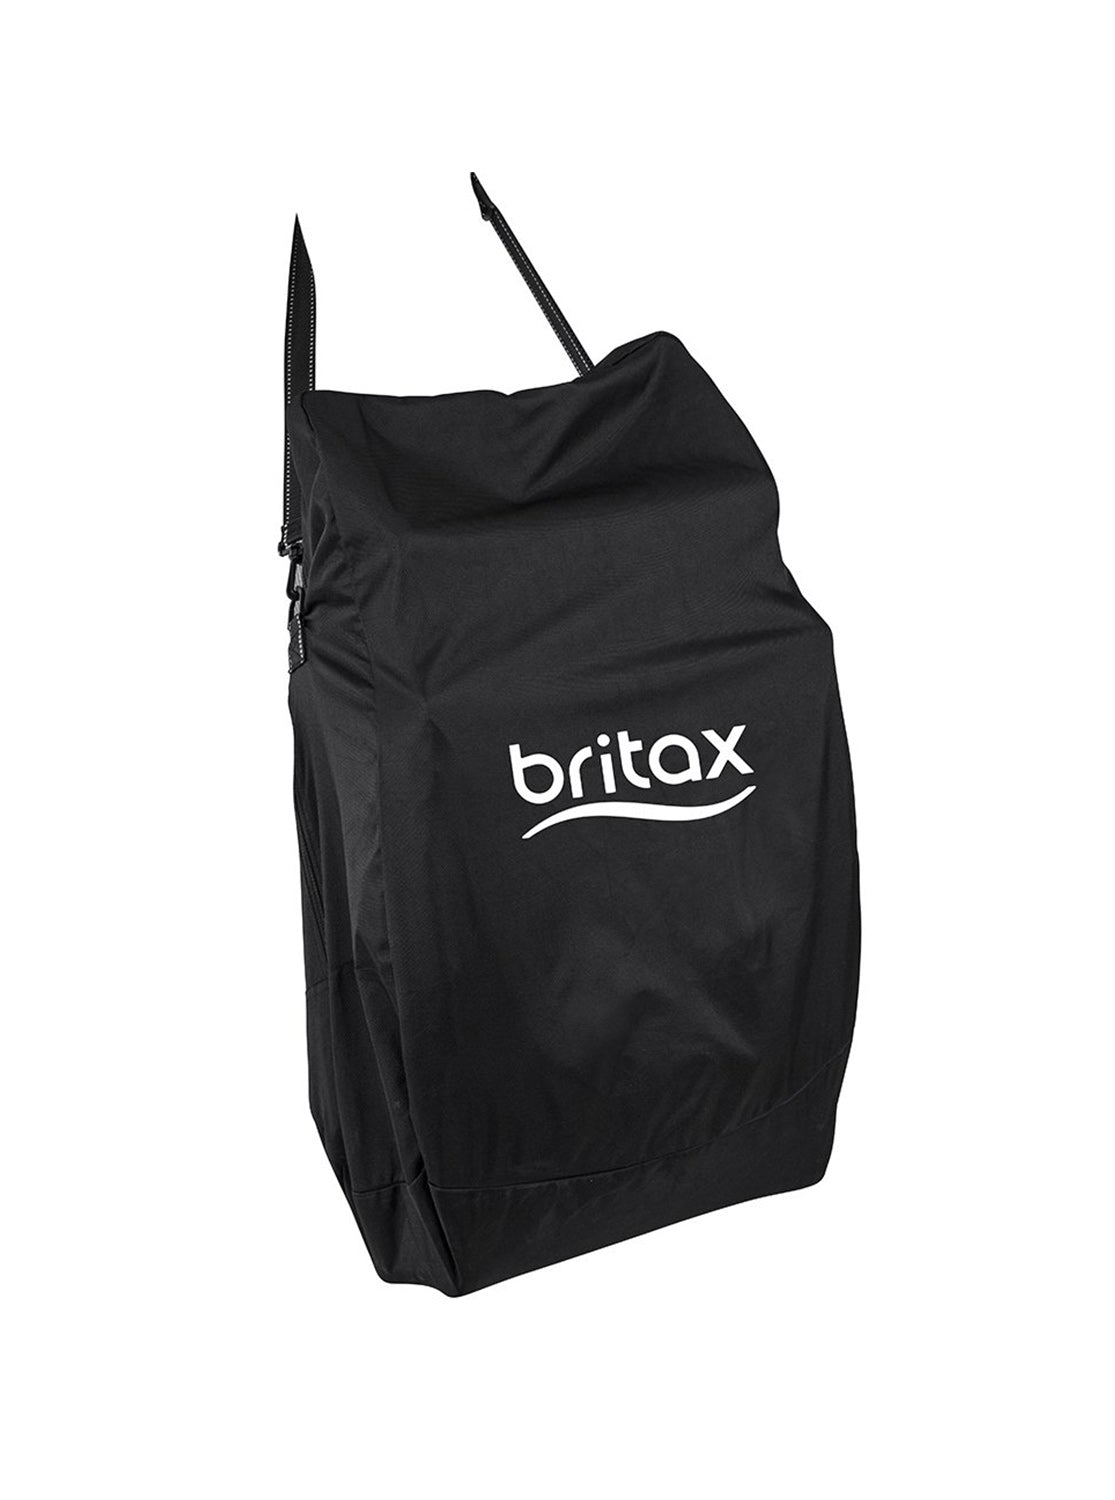 Britax B-Agile, B-Free, and Pathway Single Stroller Travel Bag with Removable Shoulder Strap, -- ANB Baby